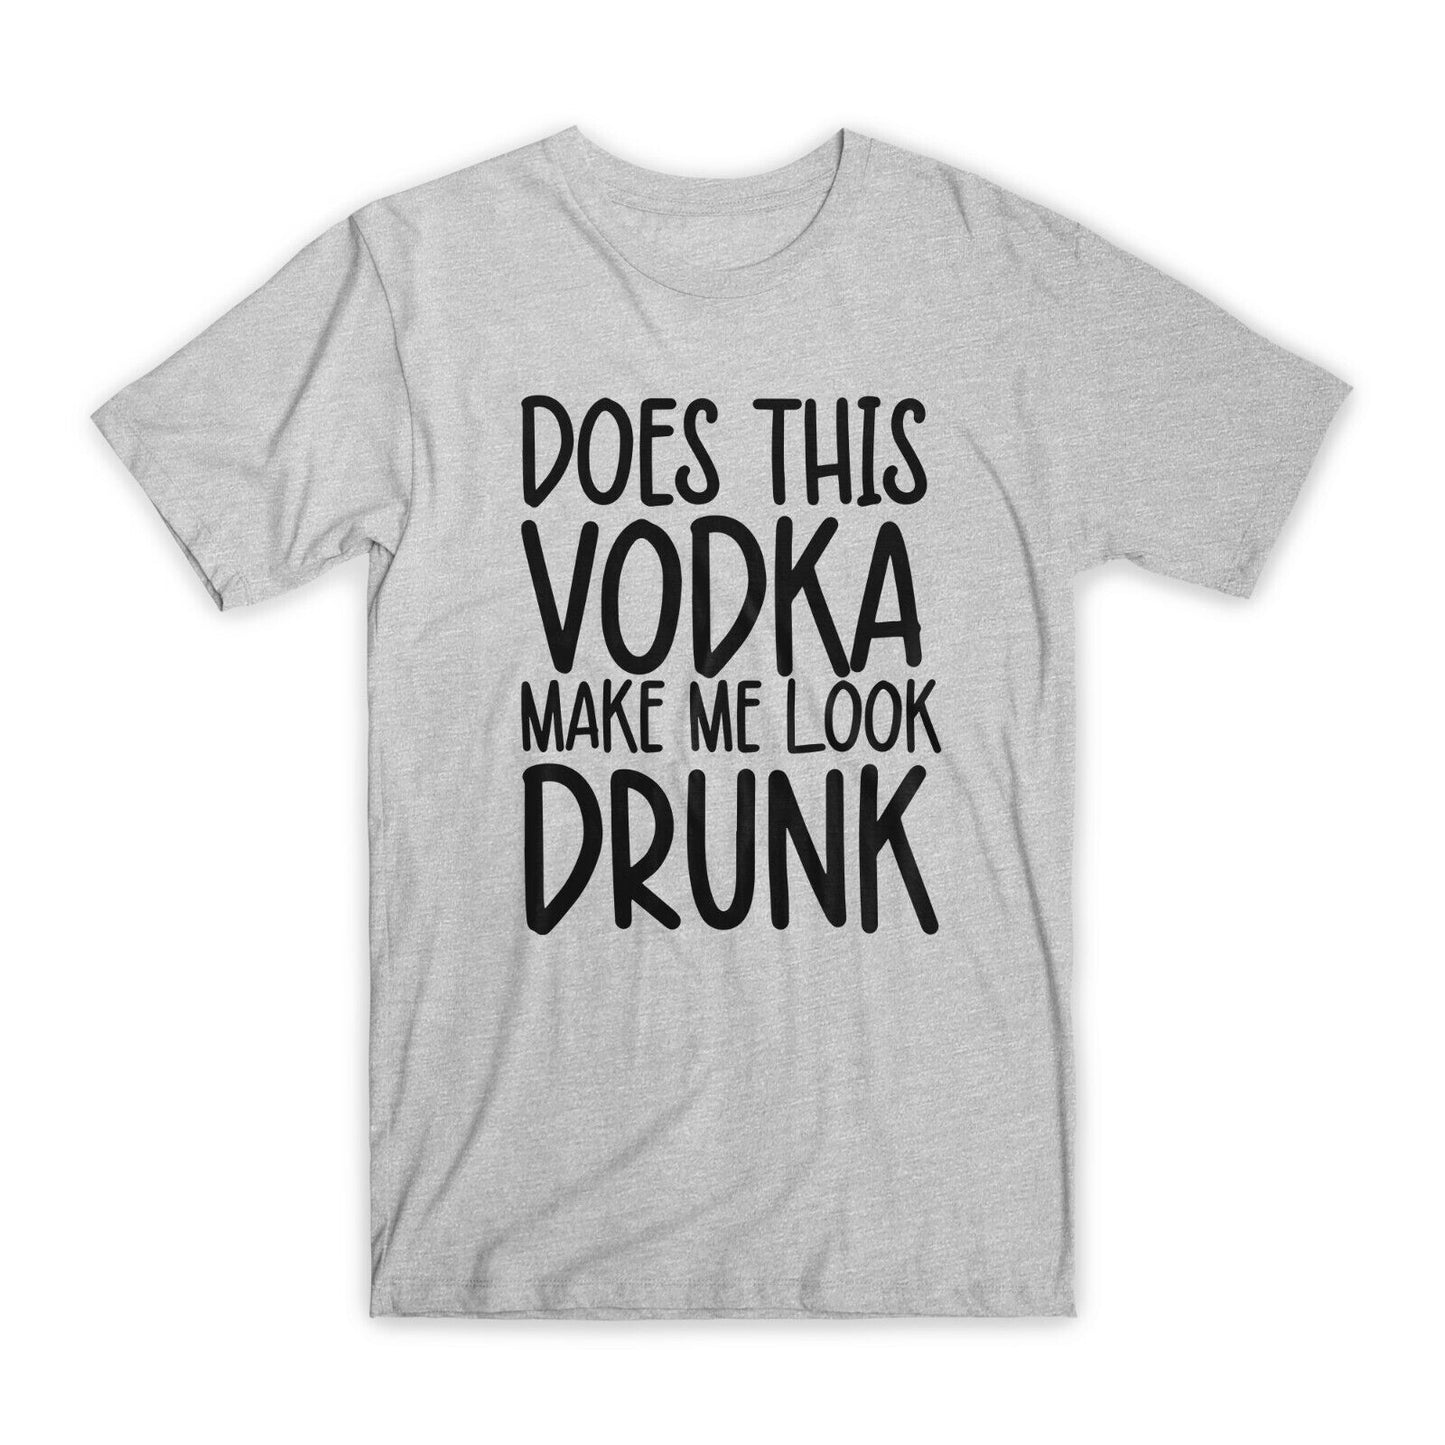 Does This Vodka Make Me Look Drunk T-Shirt Premium Soft Cotton Funny T Gift NEW